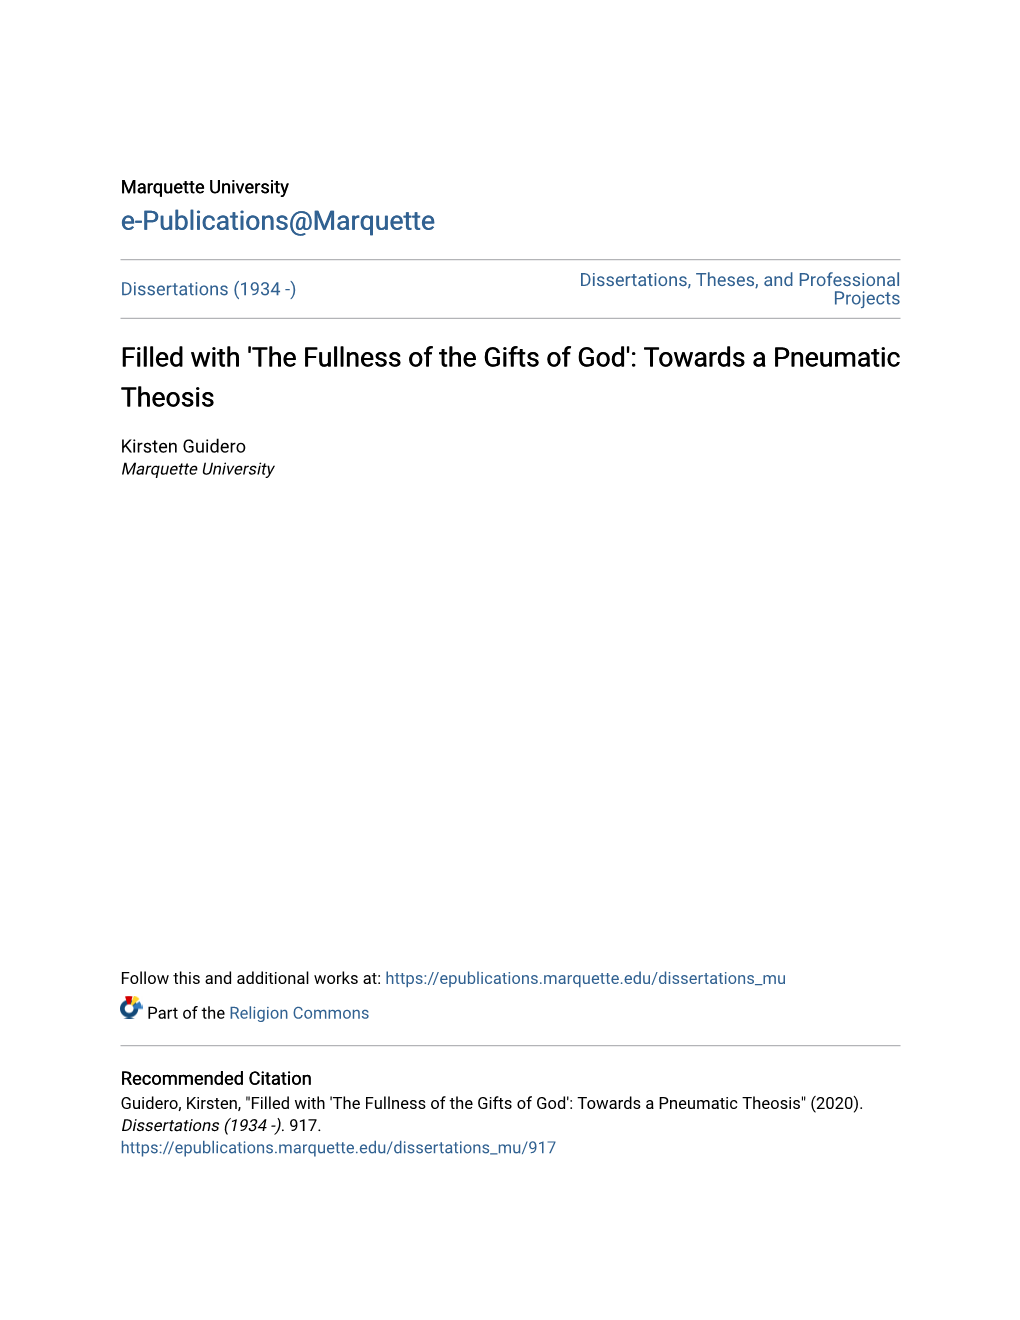 Filled with 'The Fullness of the Gifts of God': Towards a Pneumatic Theosis